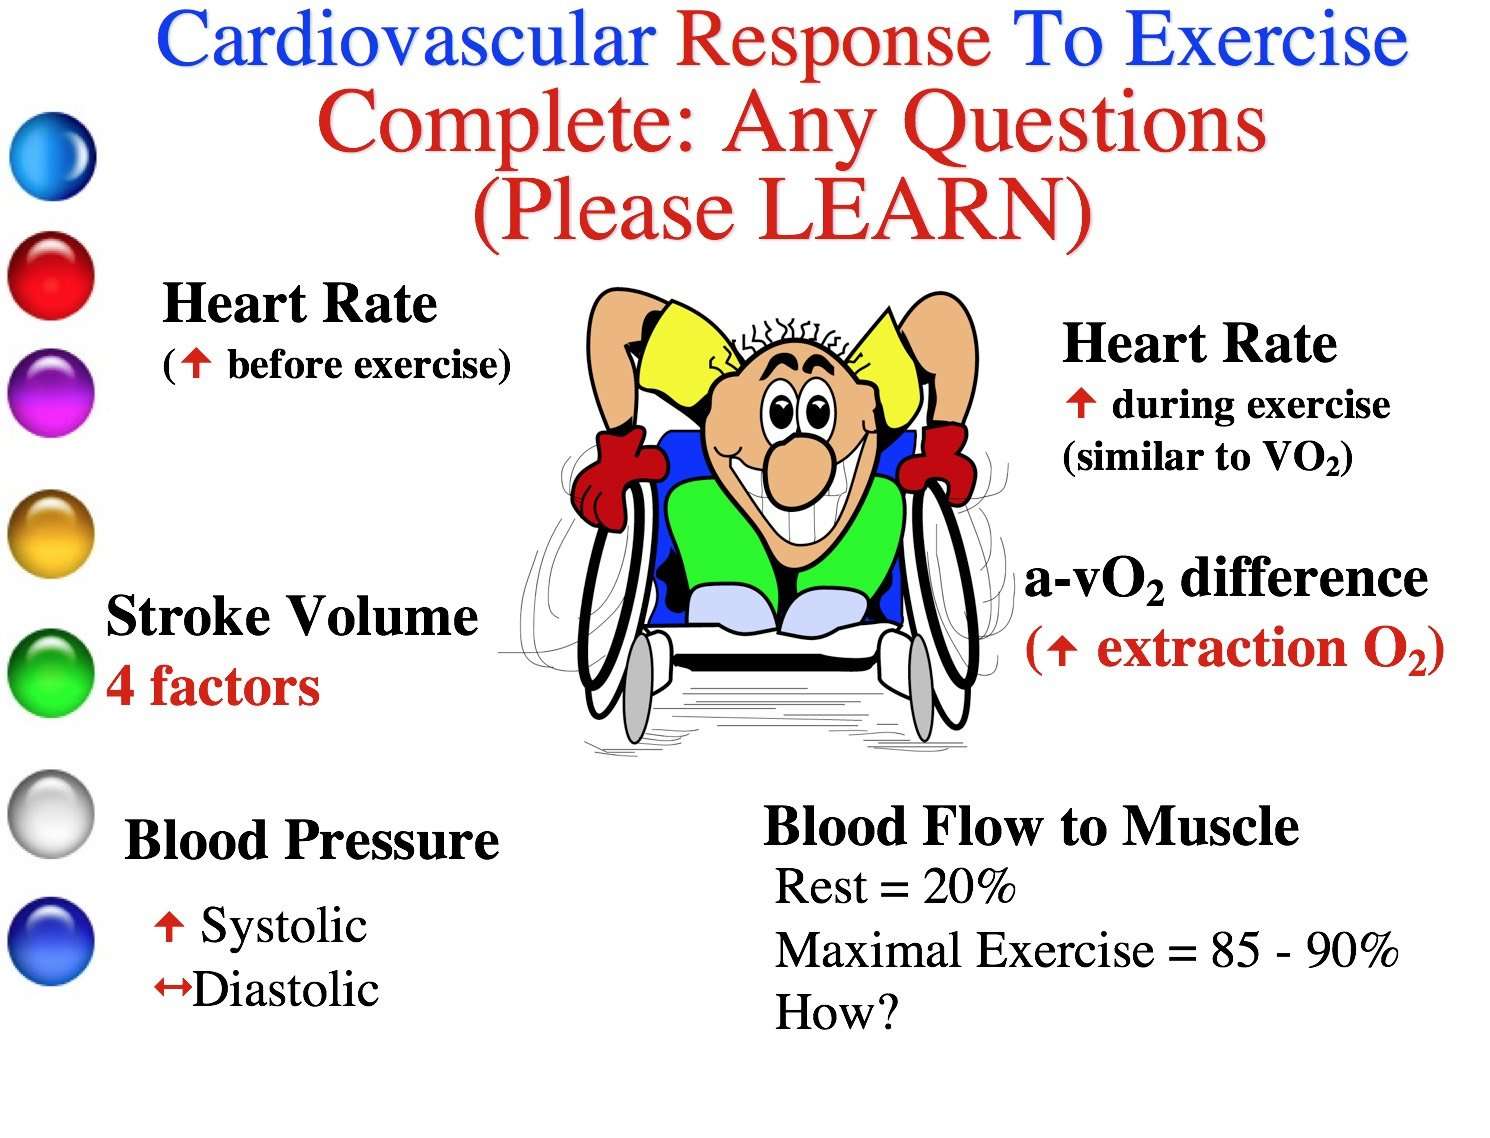 Cardiovascular responses and adaptations